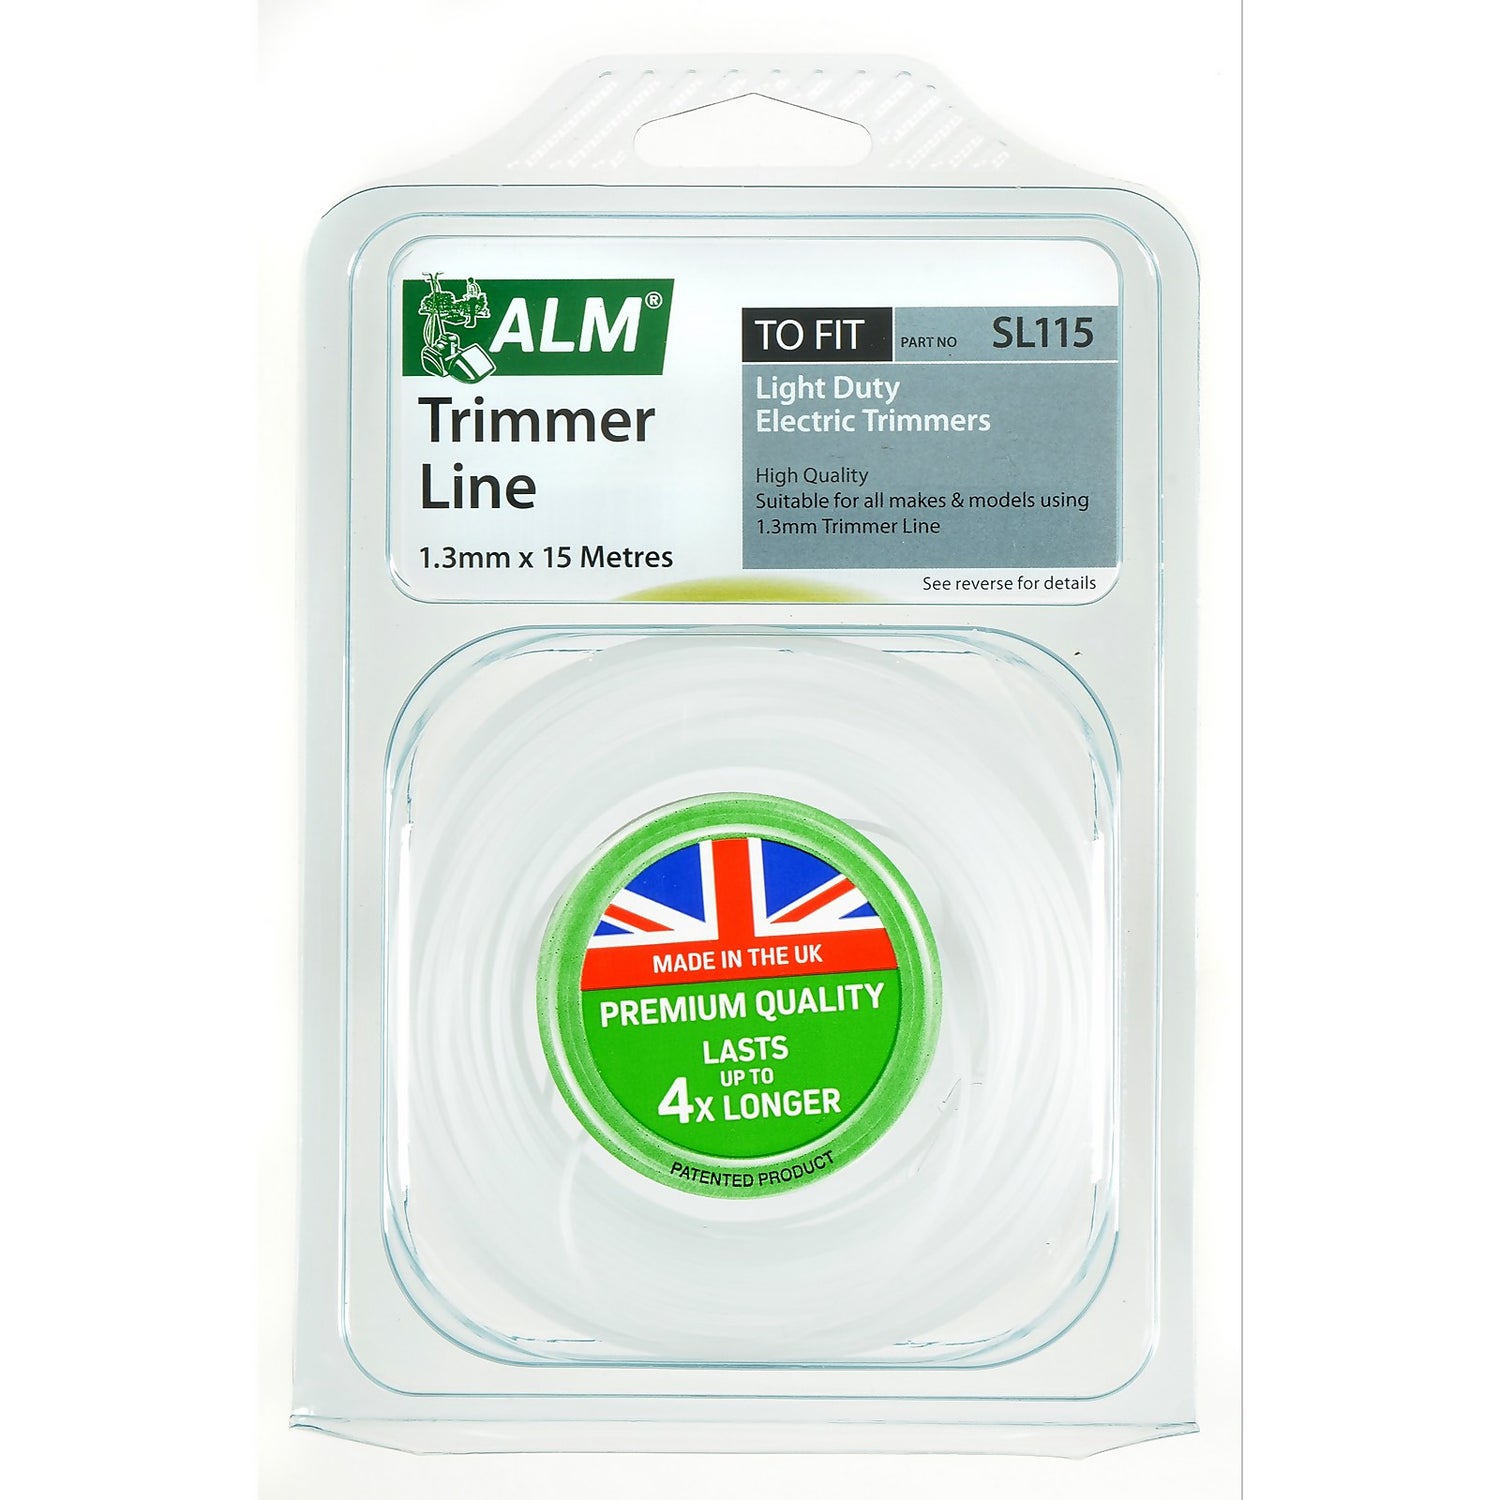 Alm Trimmer Line 15m x 1.3mm robust Nylon Spool Universal Refill Cord Wire